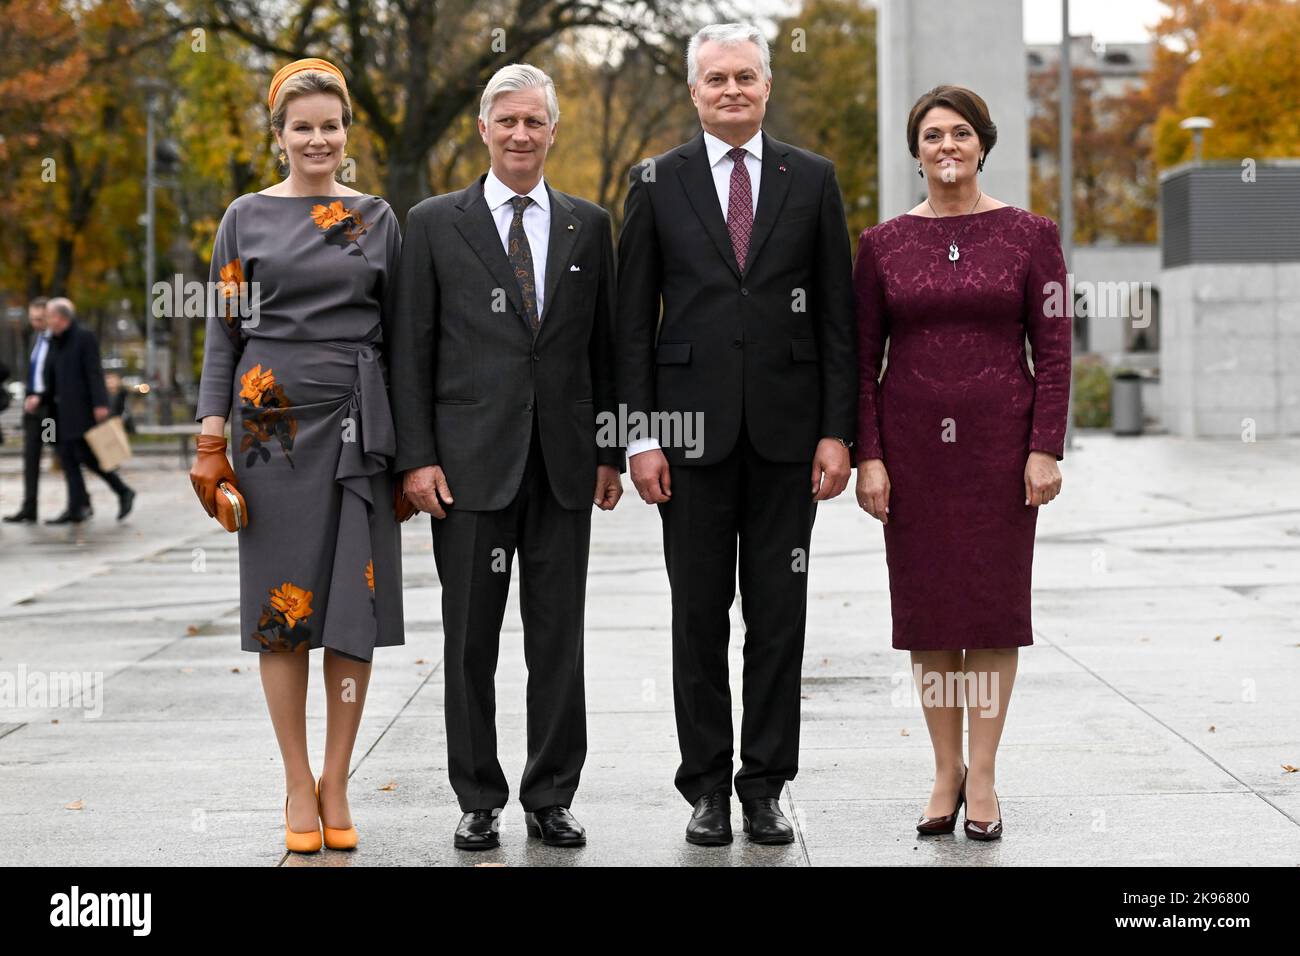 Queen Mathilde of Belgium, King Philippe - Filip of Belgium, Lithuania President Gitanas Nauseda and Lithuania first lady Diana Nausediene pose for the photographer during the official state visit of the Belgian Royal Couple to the Republic of Lithuania, Wednesday 26 October 2022, in Pabrade. BELGA PHOTO DIRK WAEM Stock Photo